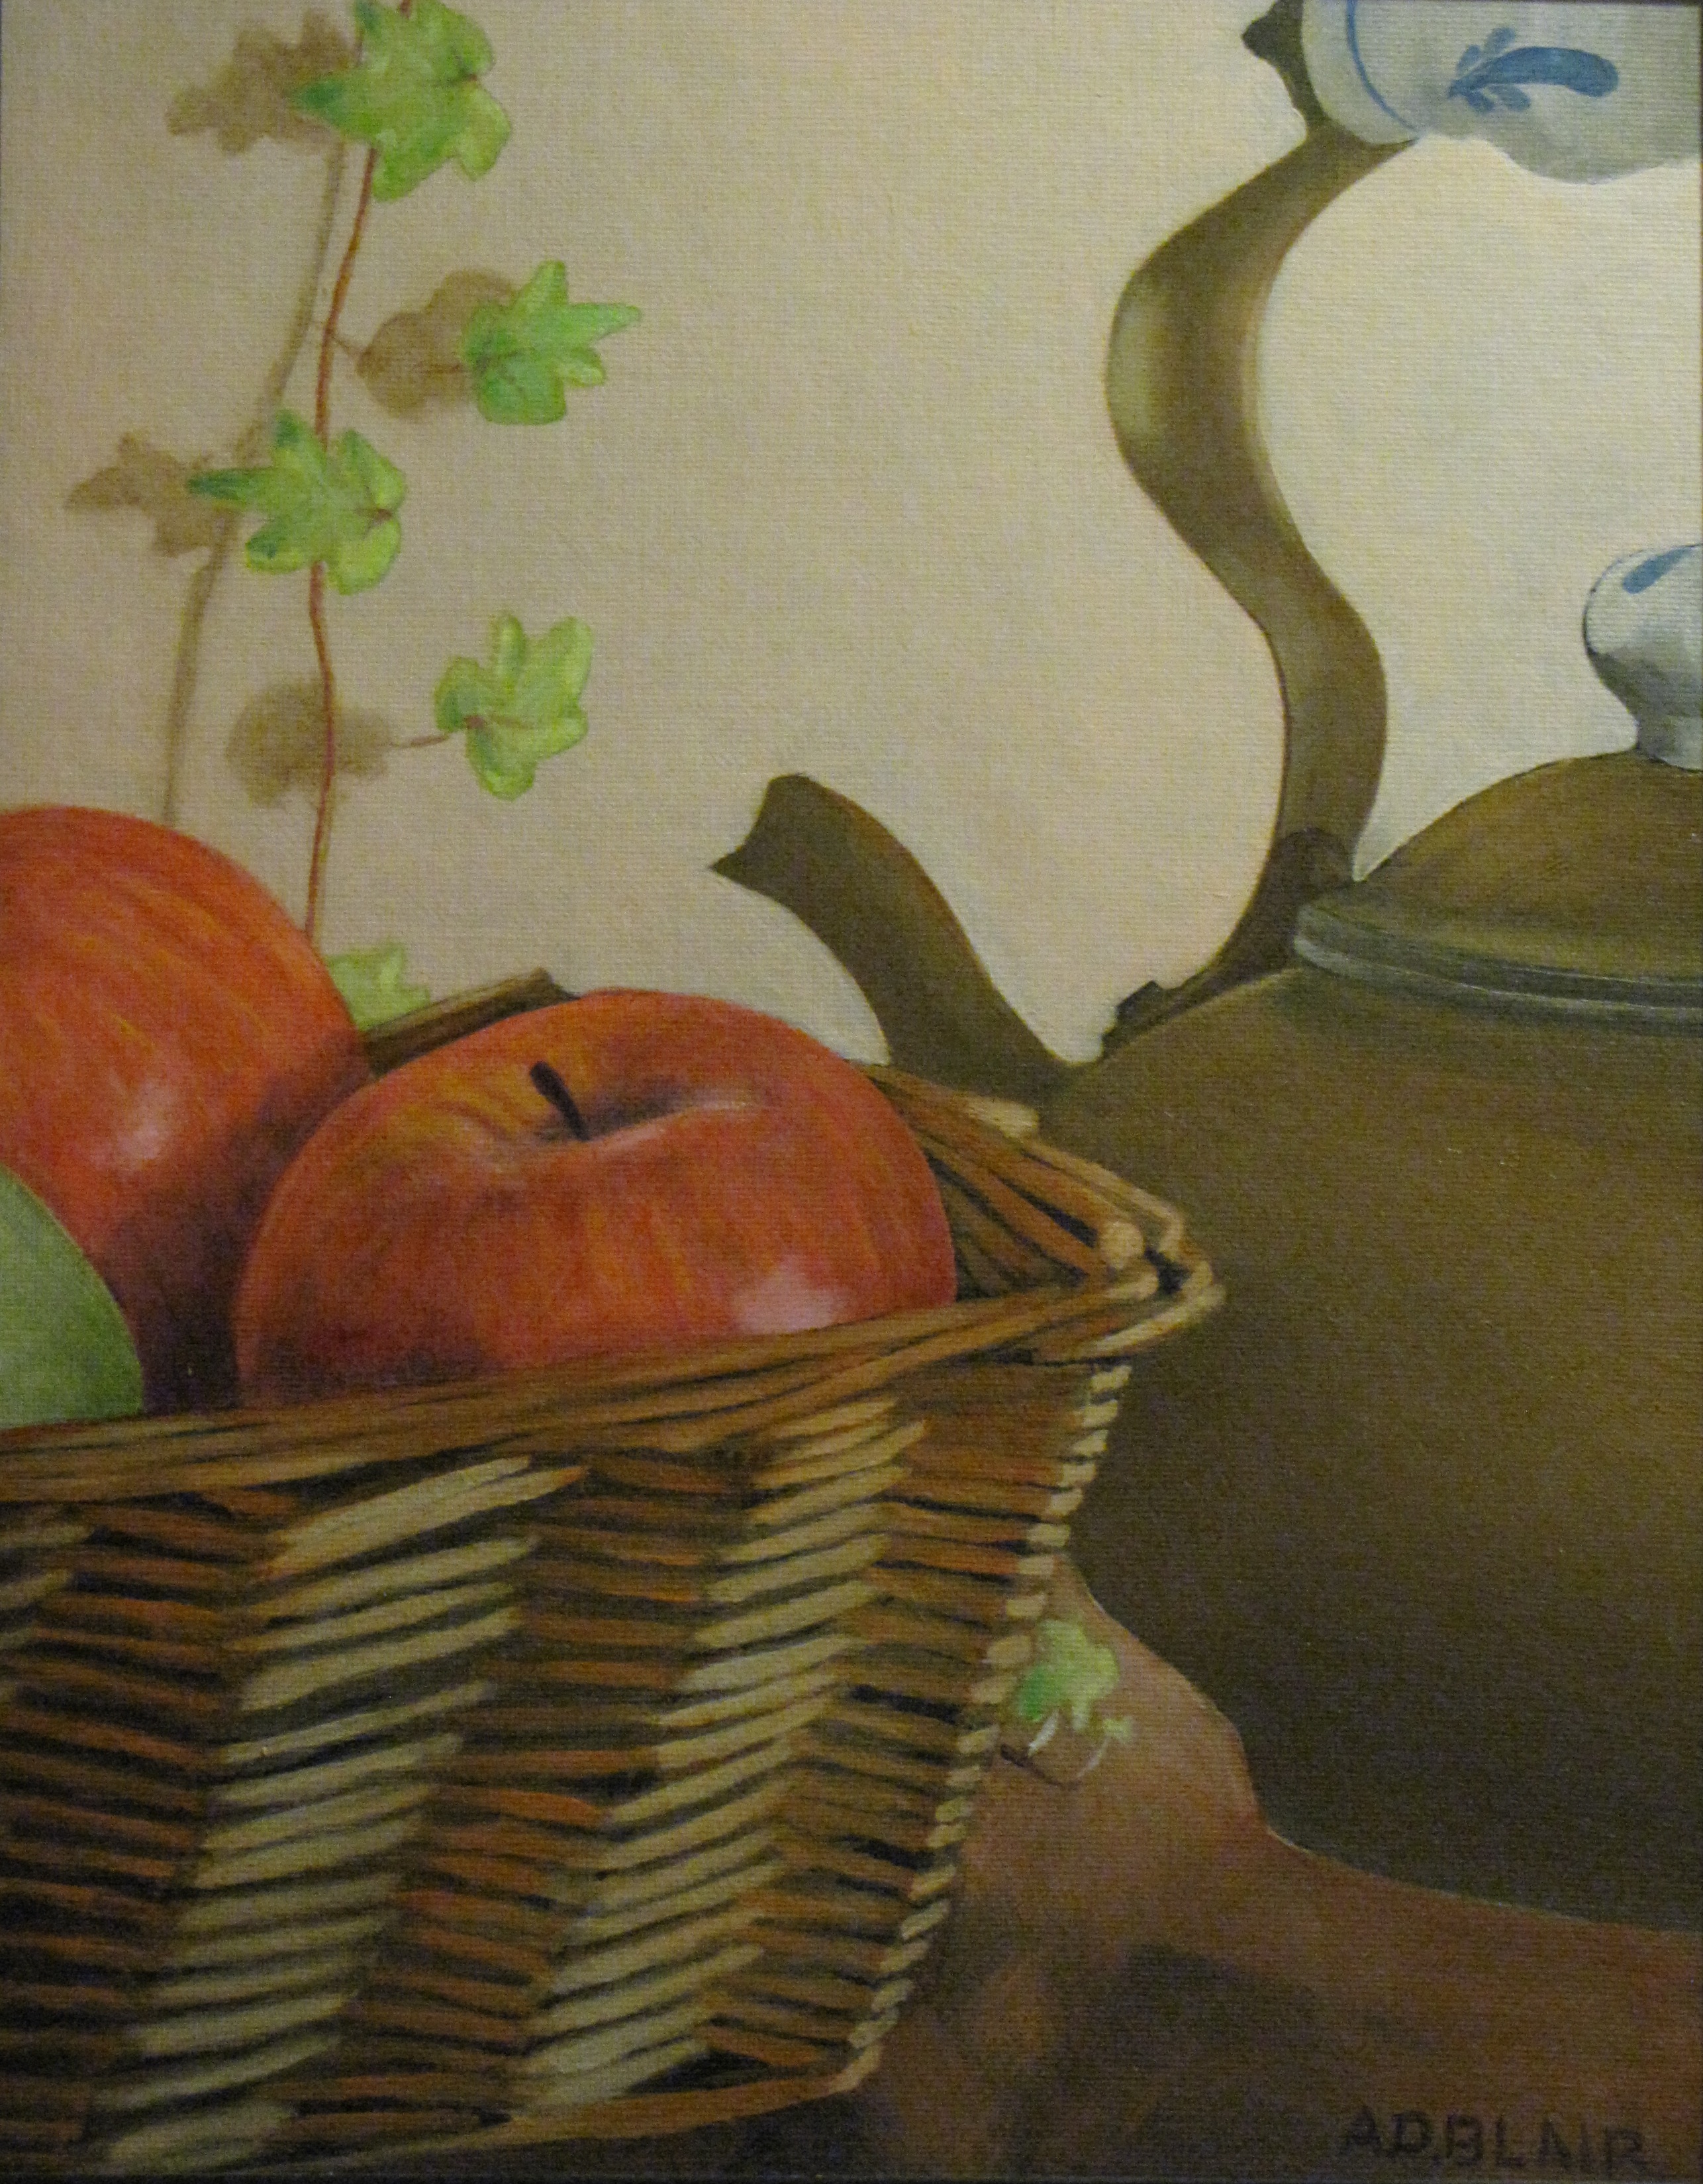 Fruit Basket and Kettle - oil on canvas board, 11" x 14"